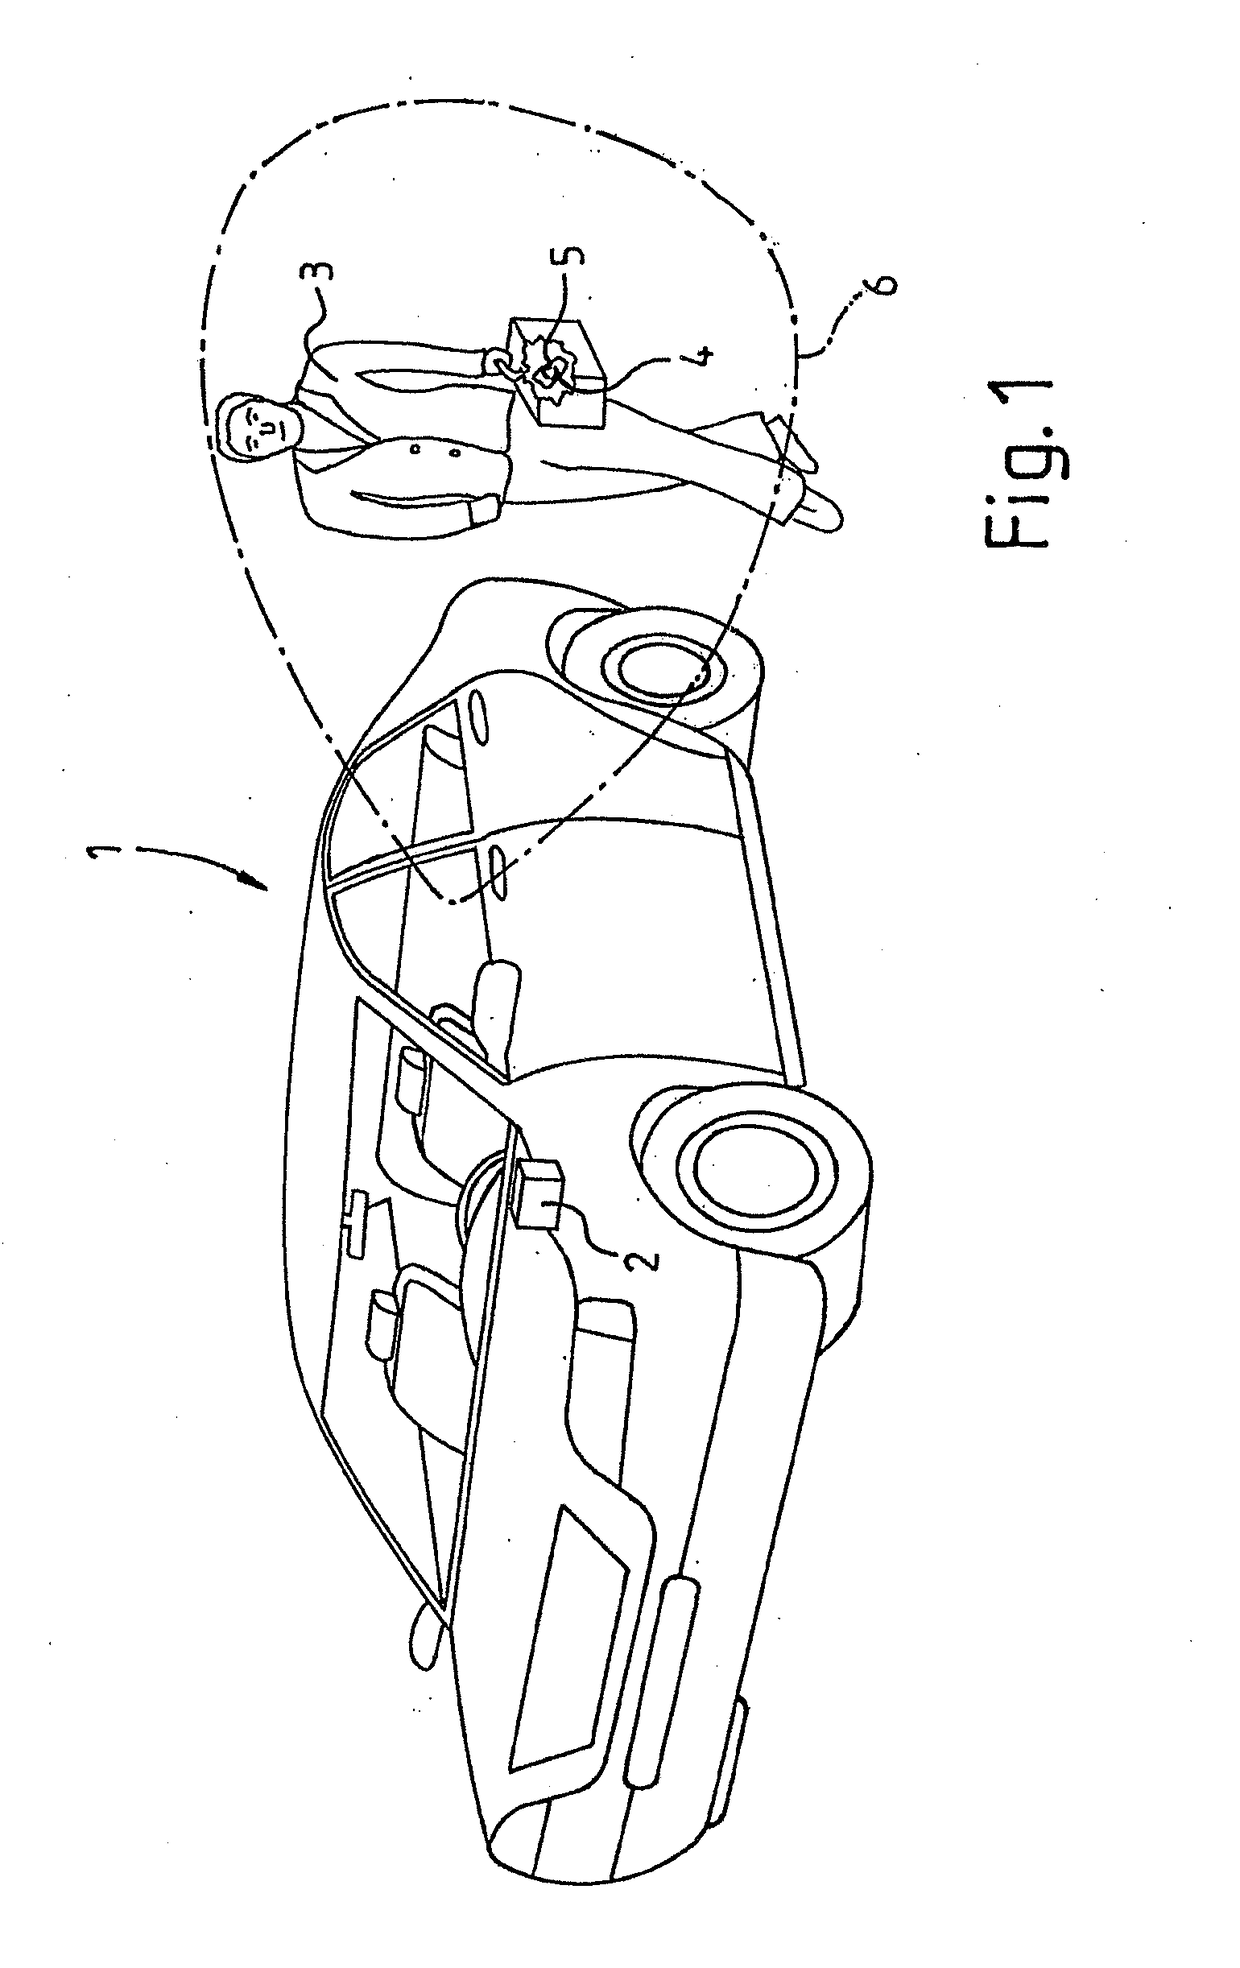 Apparatus for locking and/or unlocking